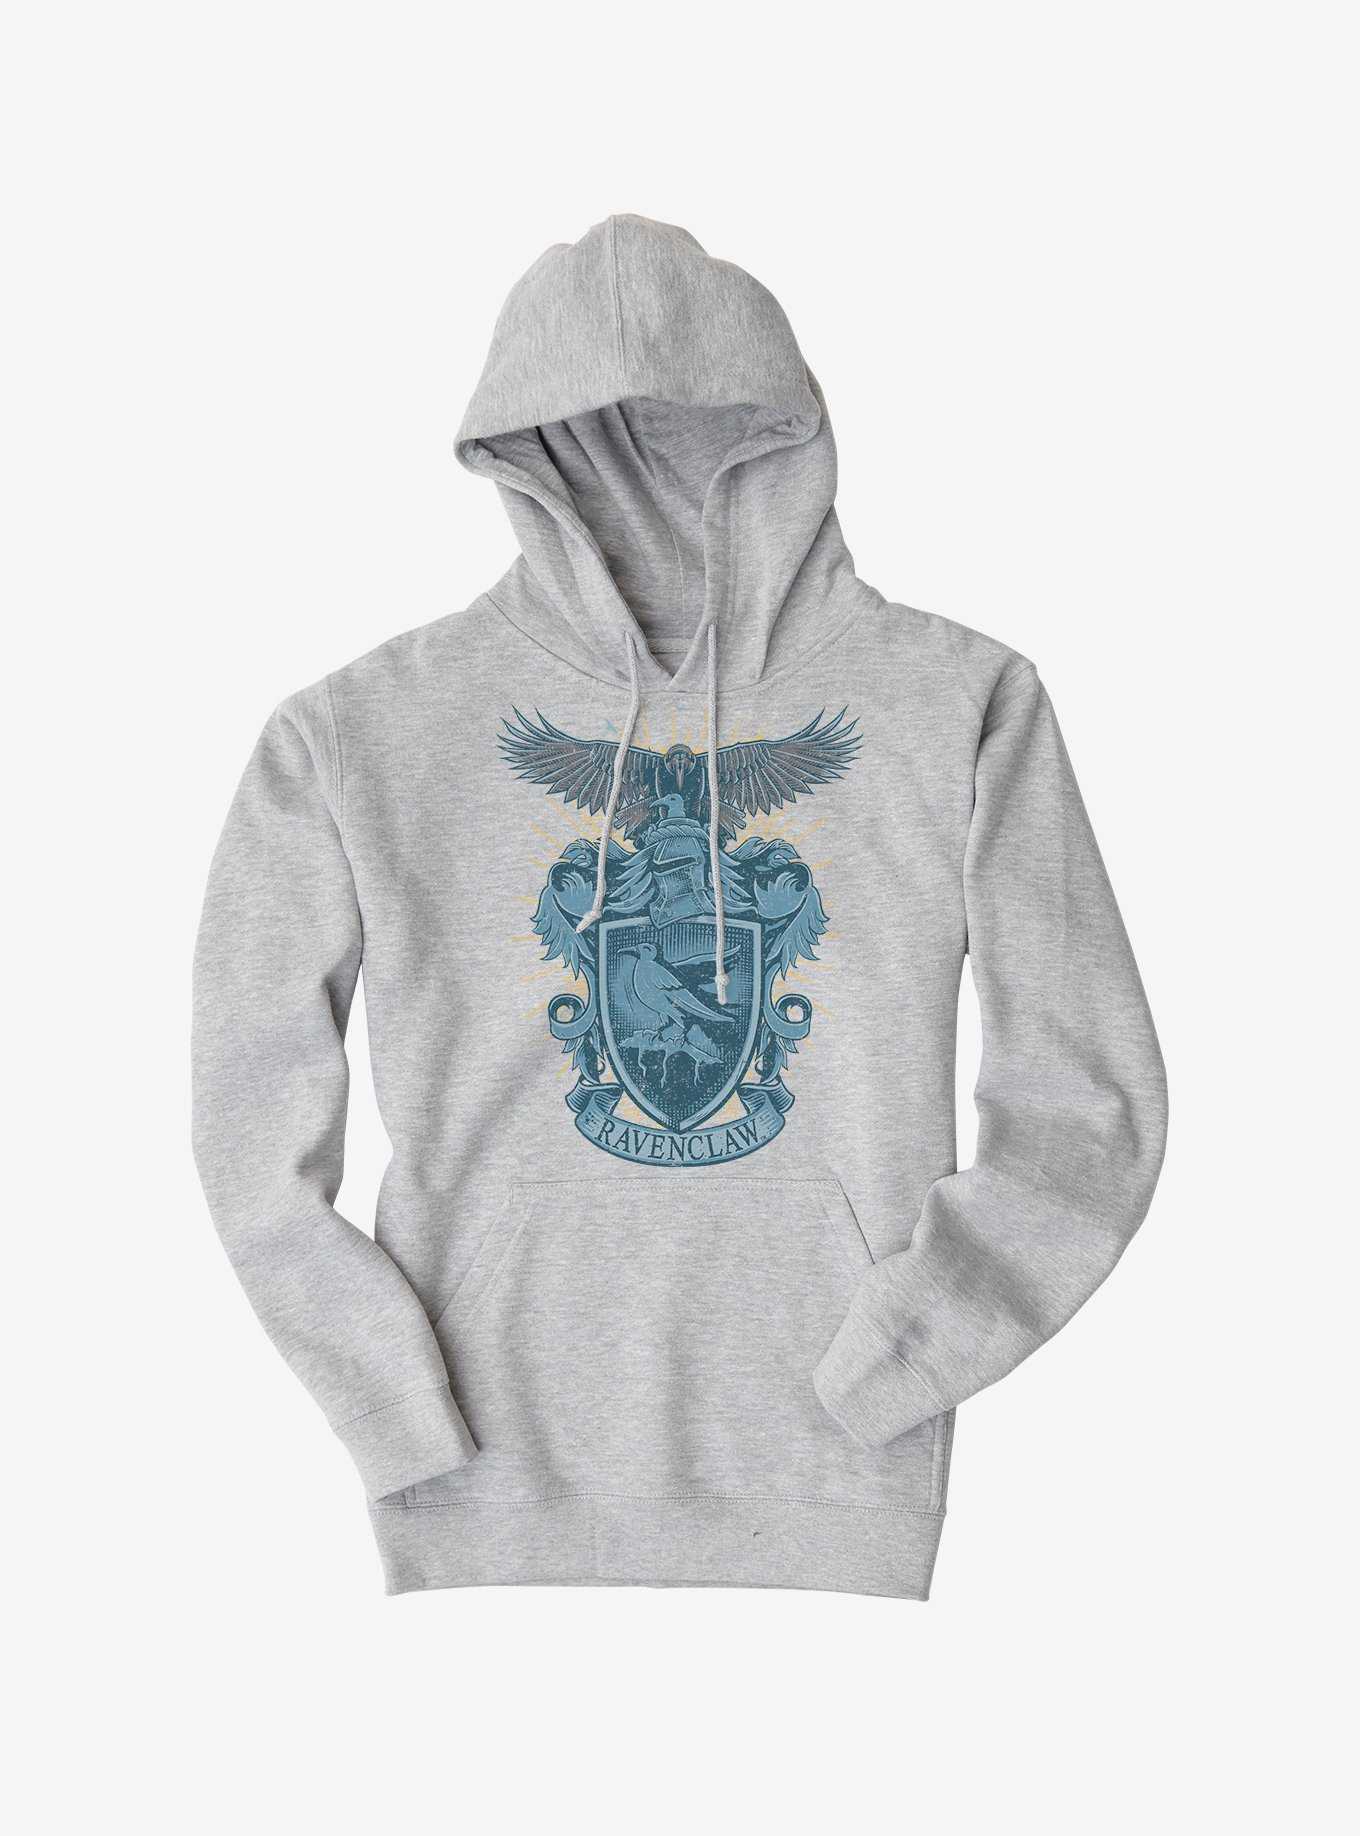 OFFICIAL Ravenclaw Hoodies Topic & | Hot Sweaters